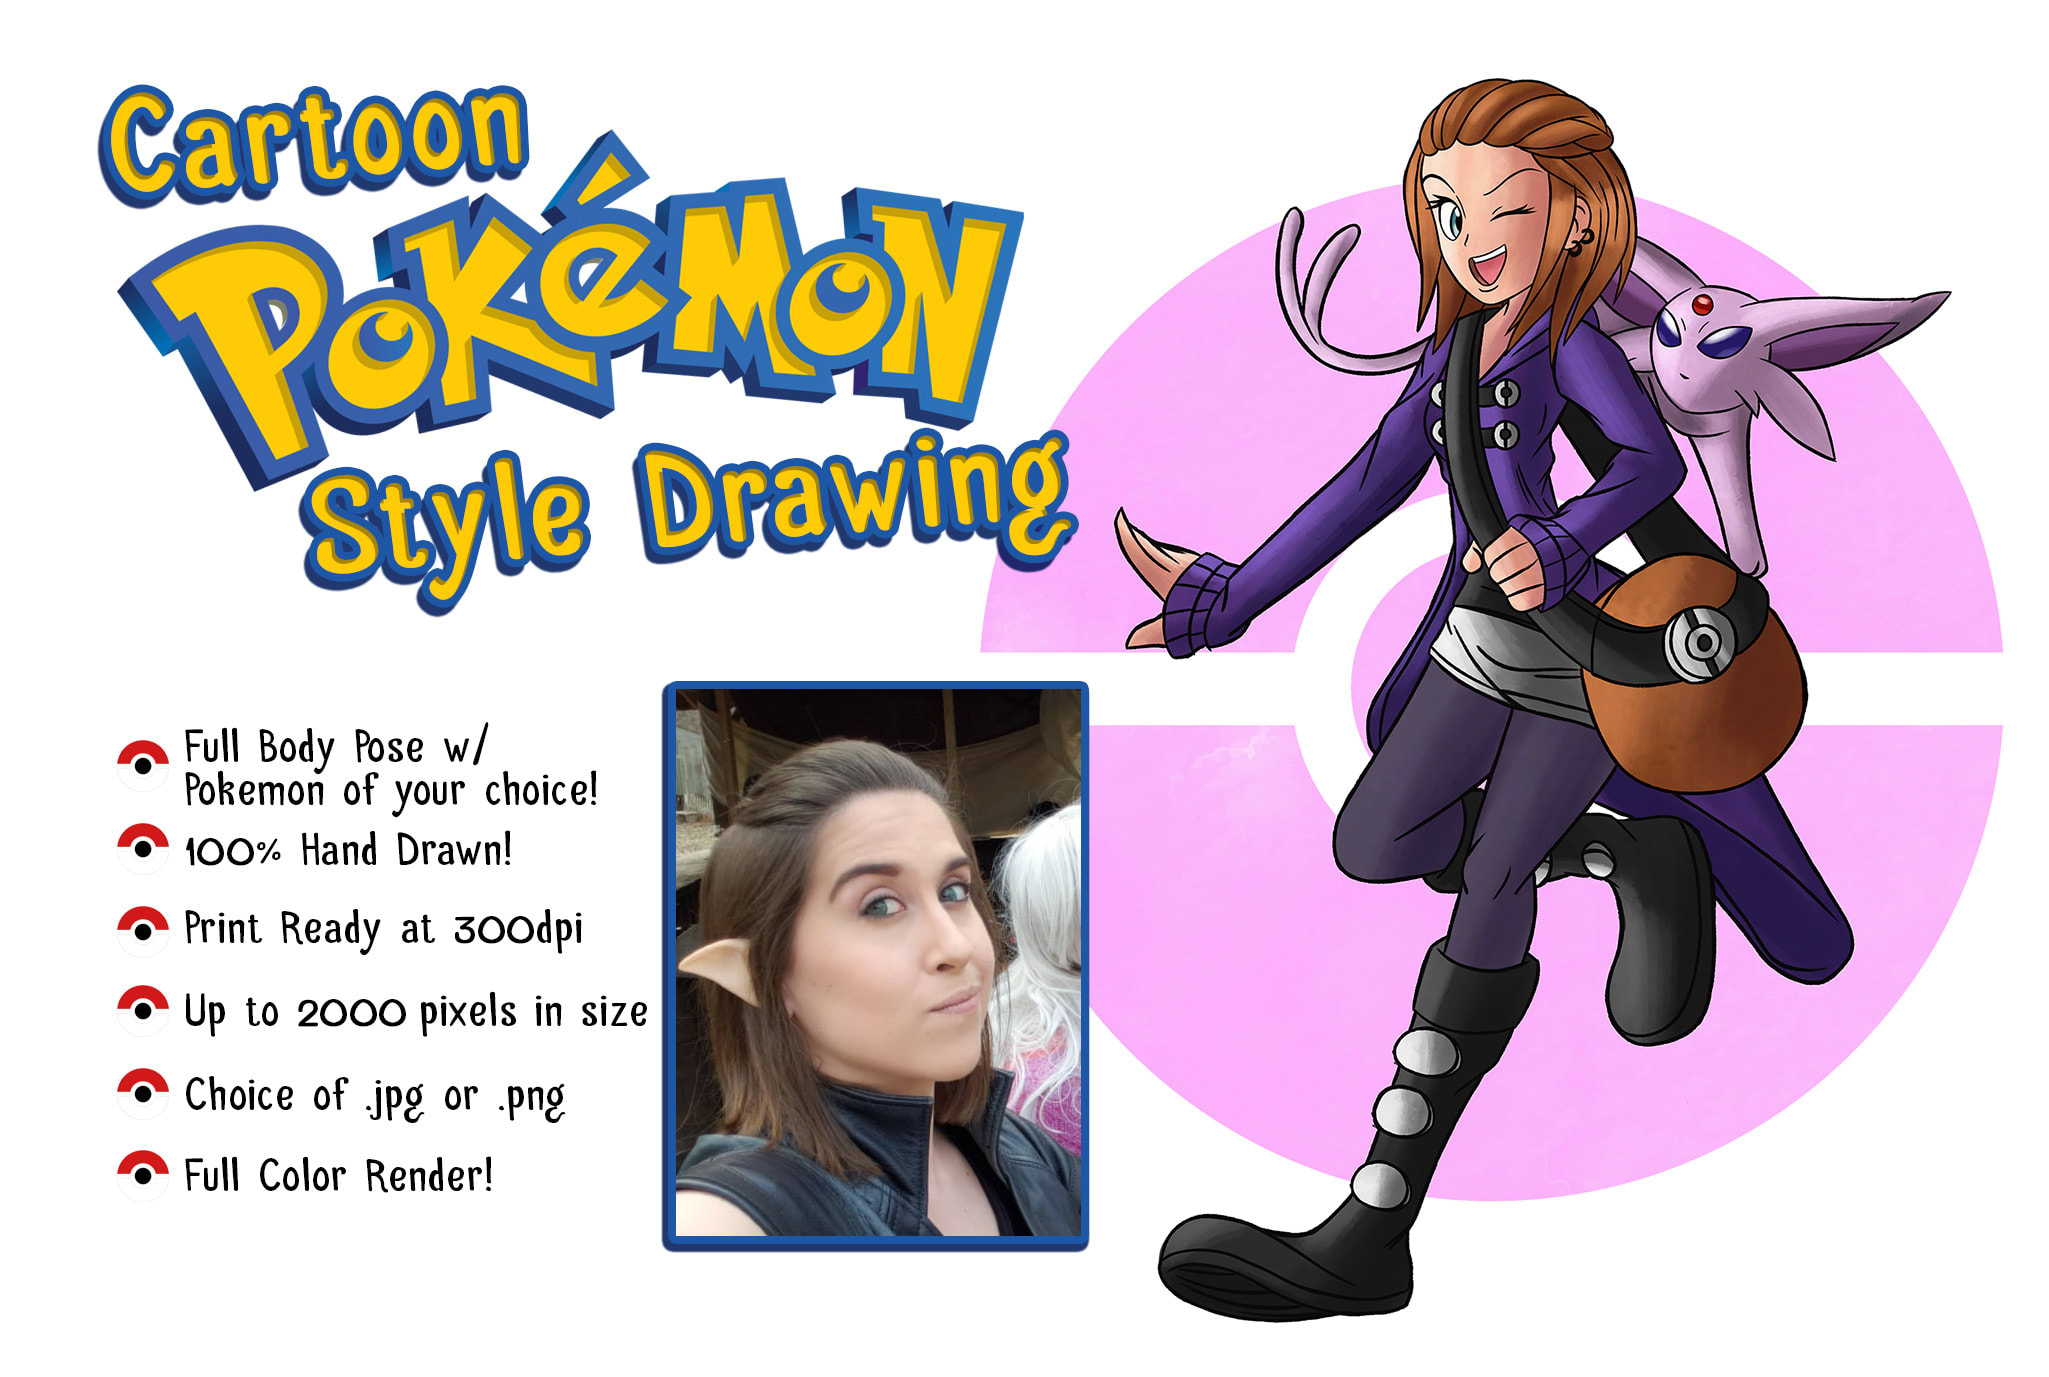 Draw you as a pokemon trainer with your team by Chambonr | Fiverr